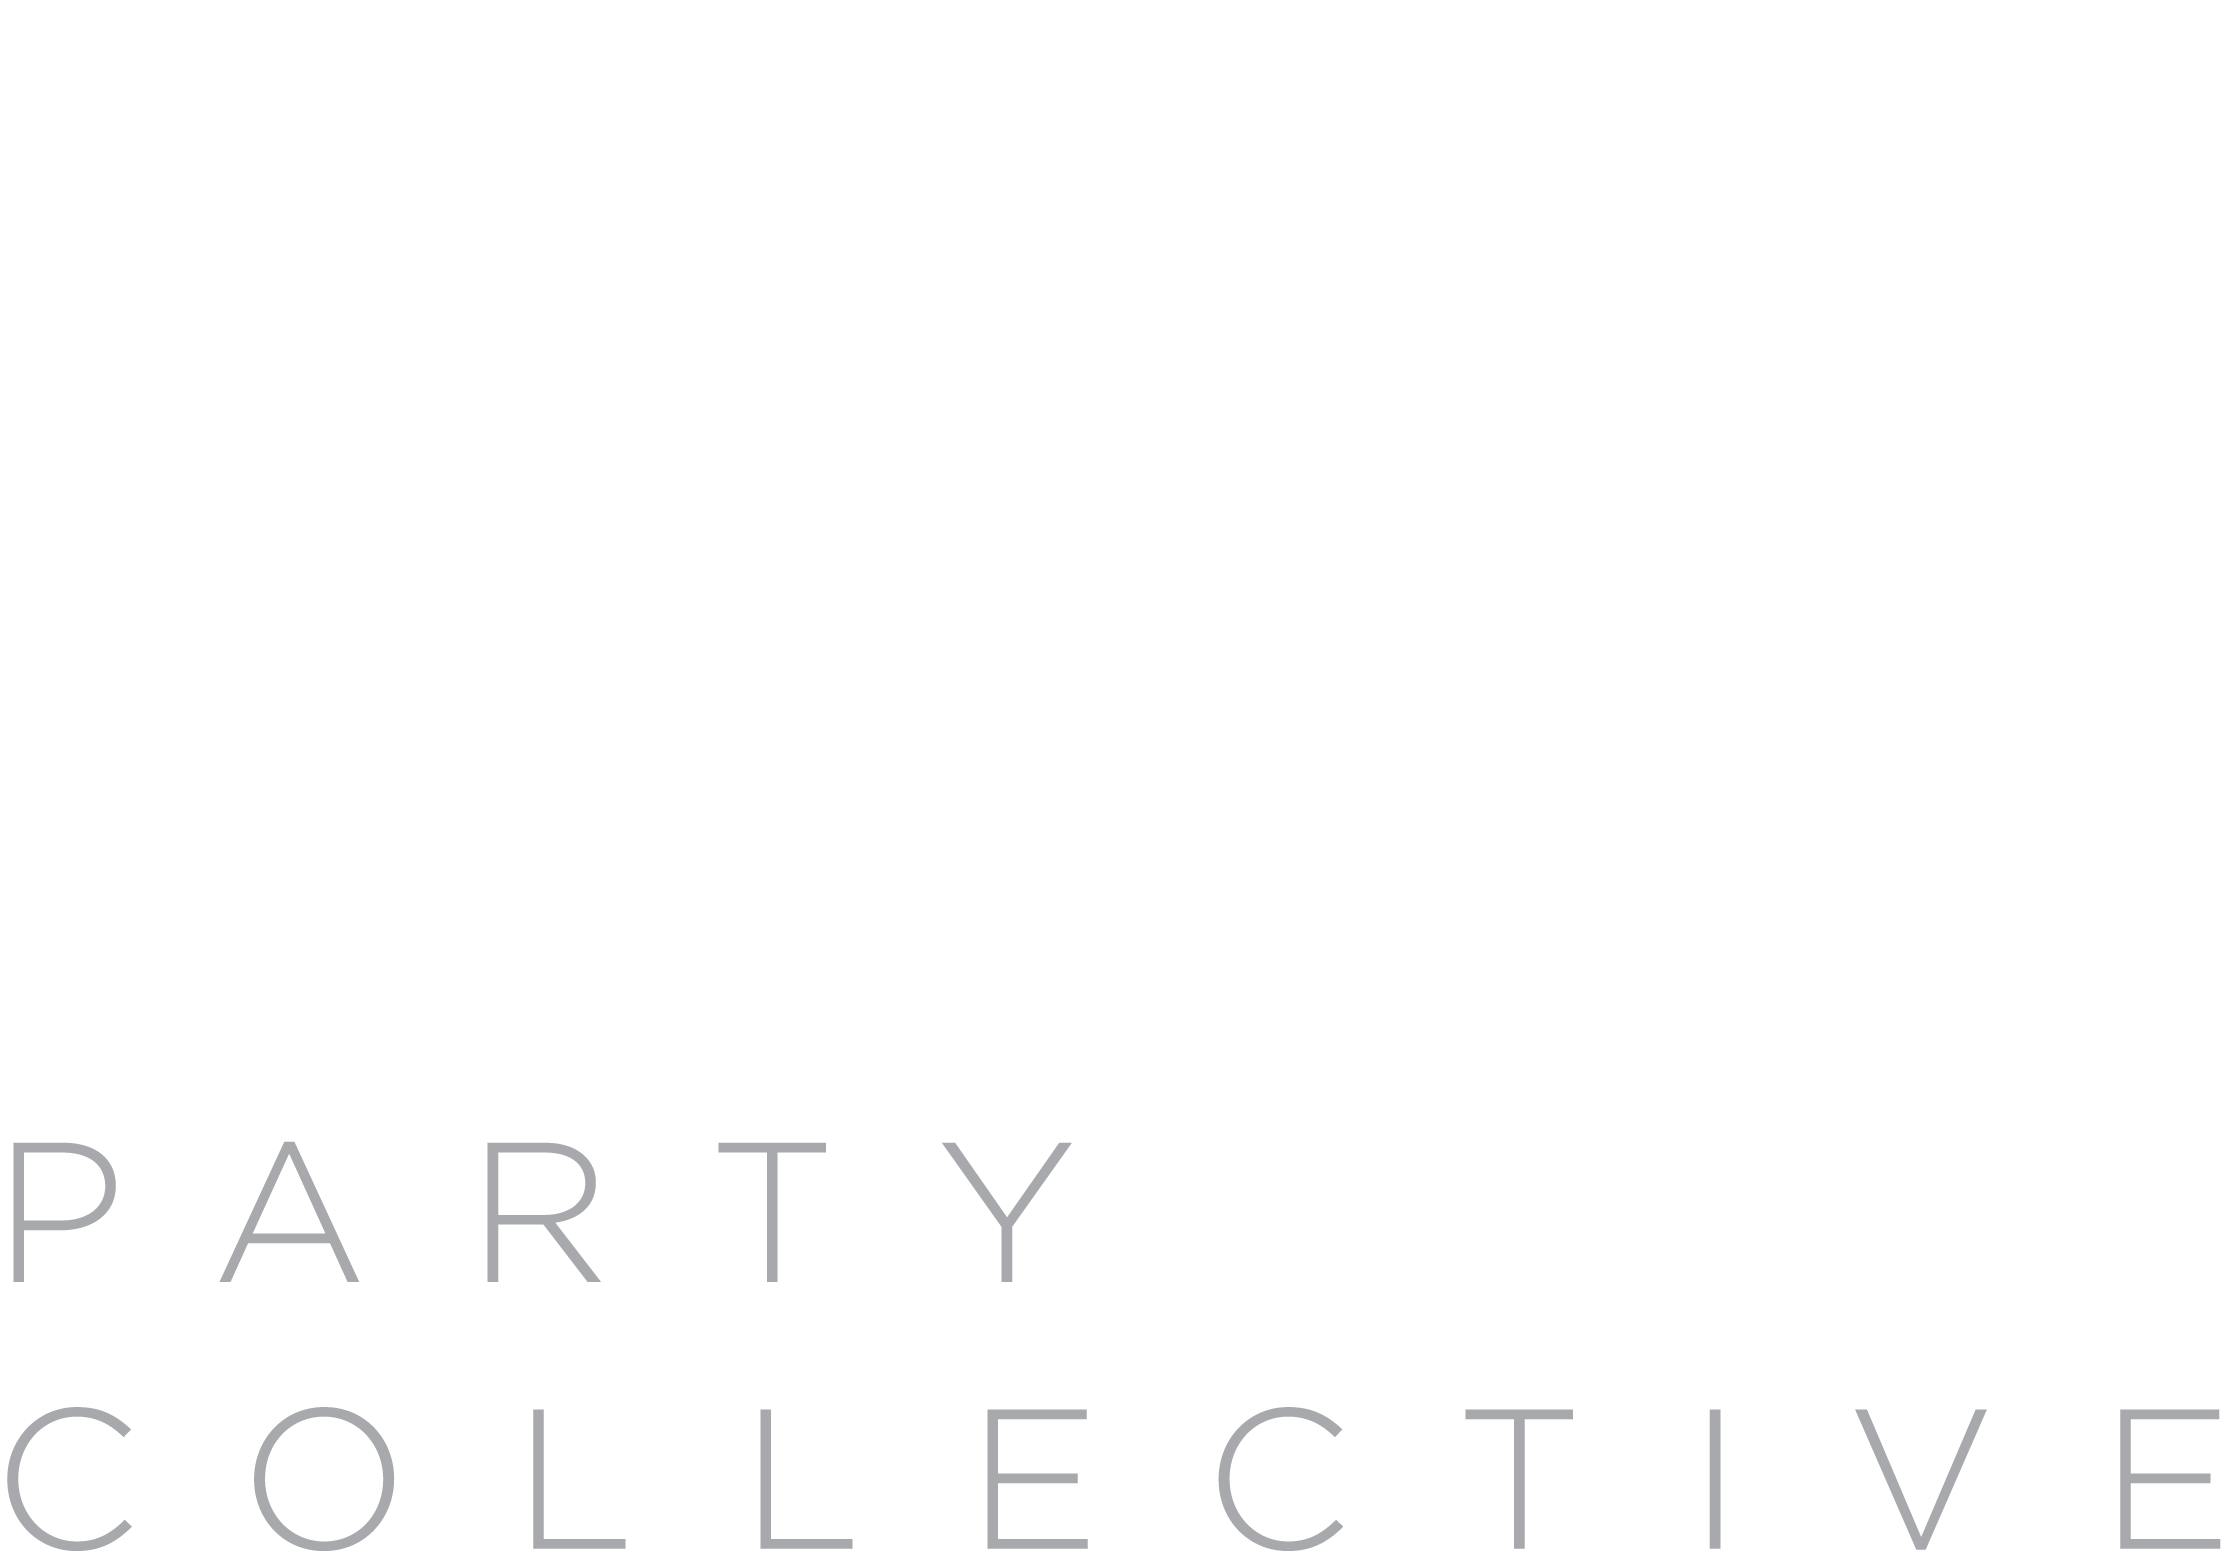 Party Collective Hey Party Collective (2465x1790), Png Download